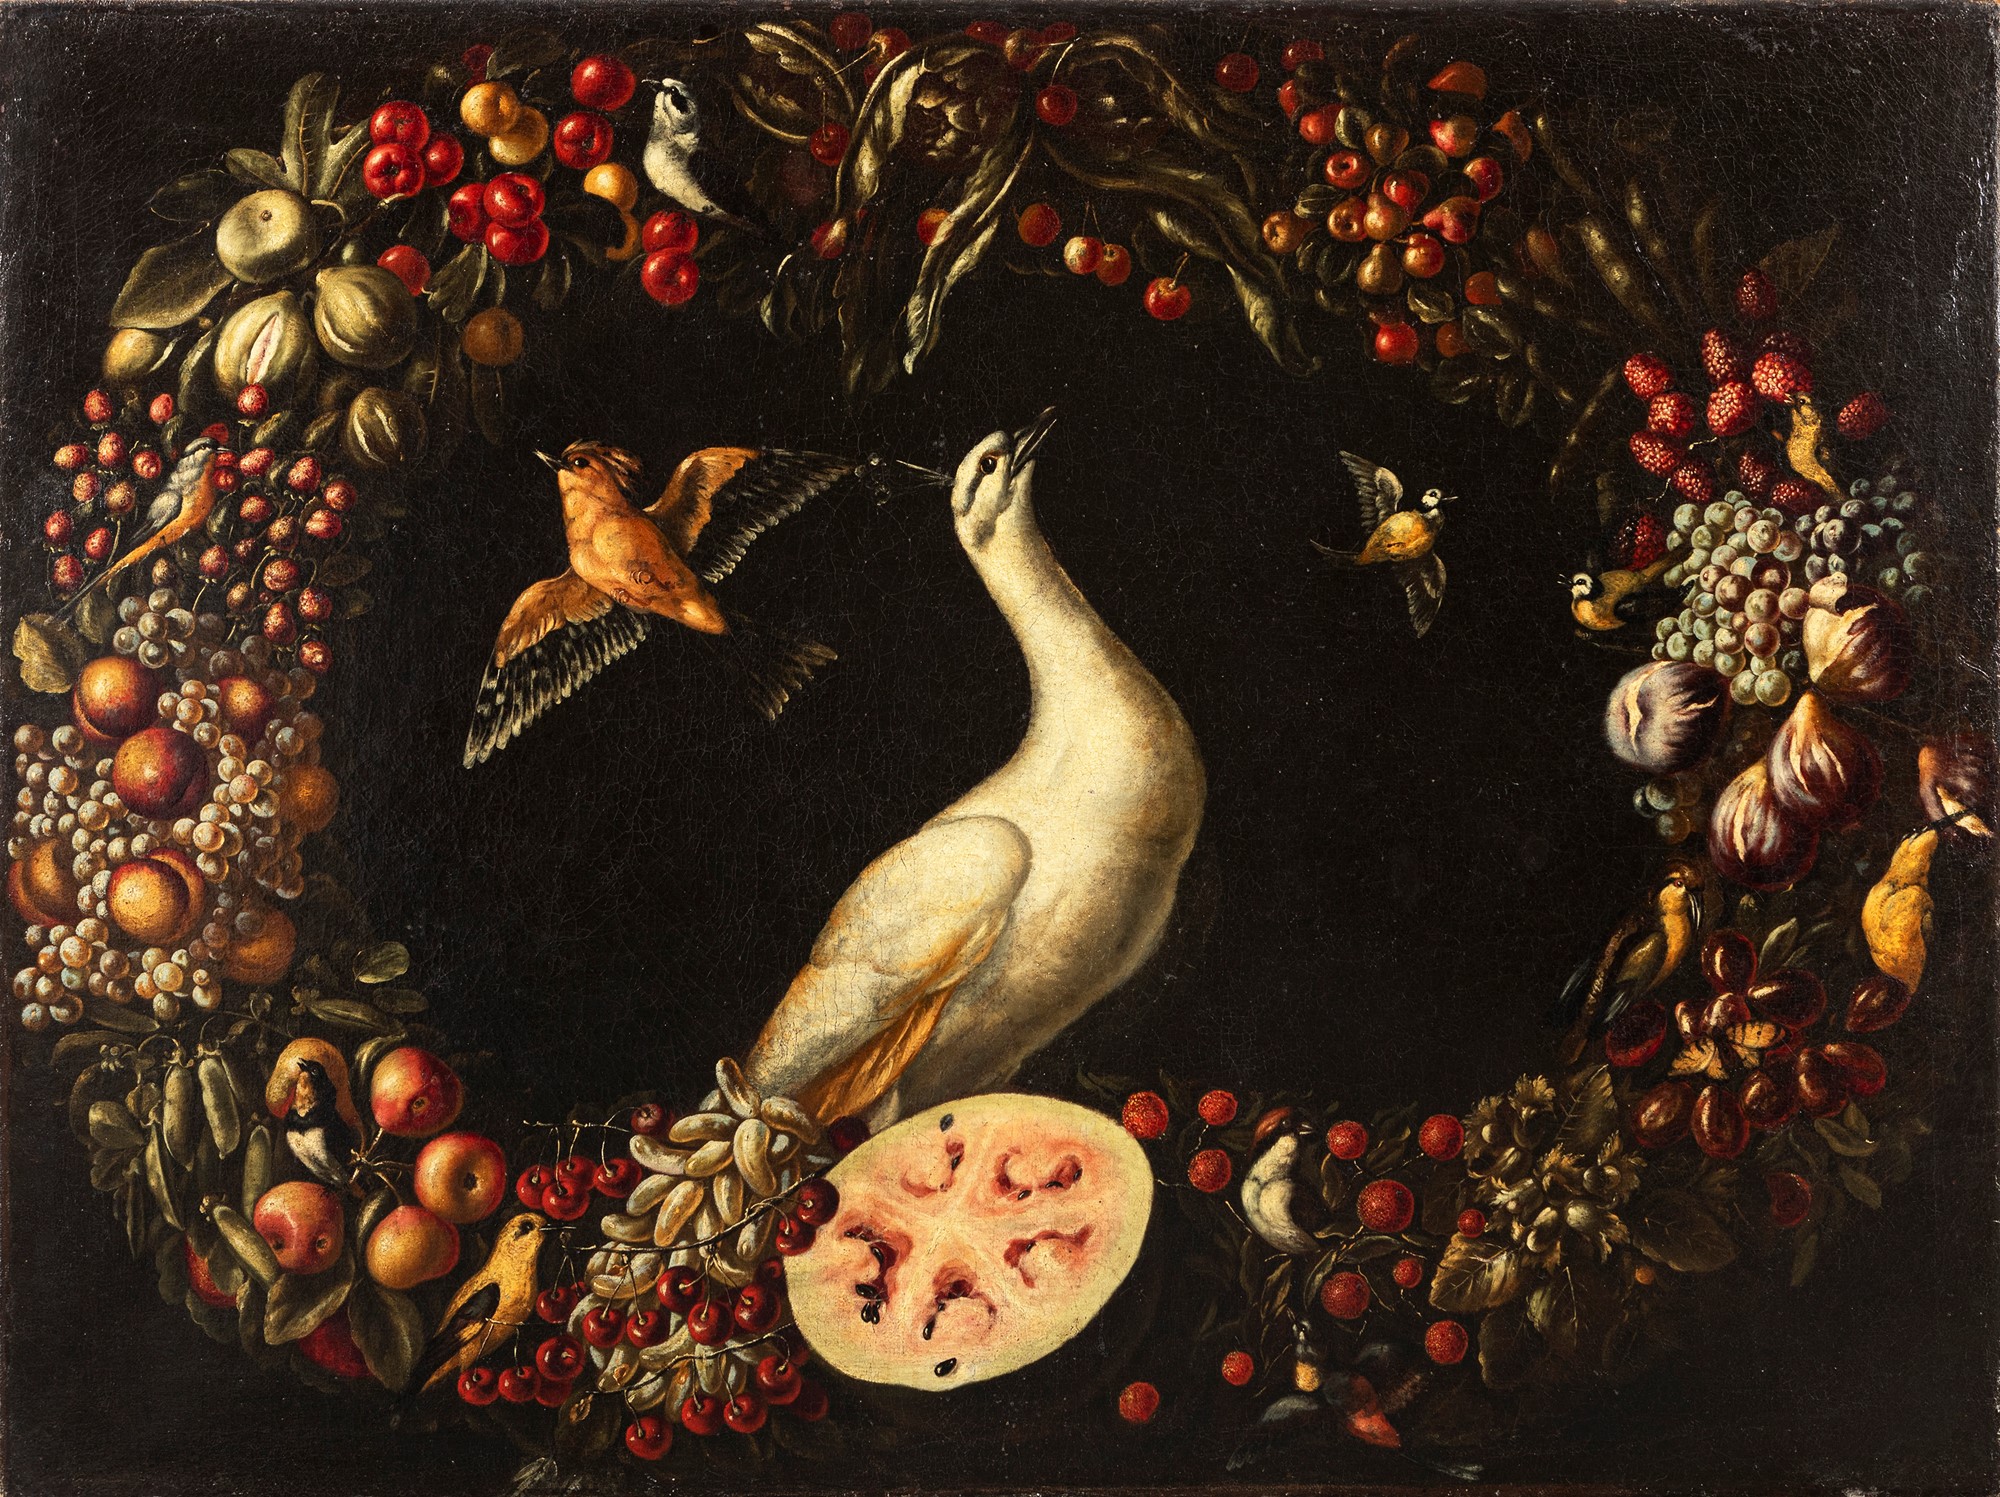 Neapolitan school, XVII century - Garland of fruit and vegetables with white peacock and other birds